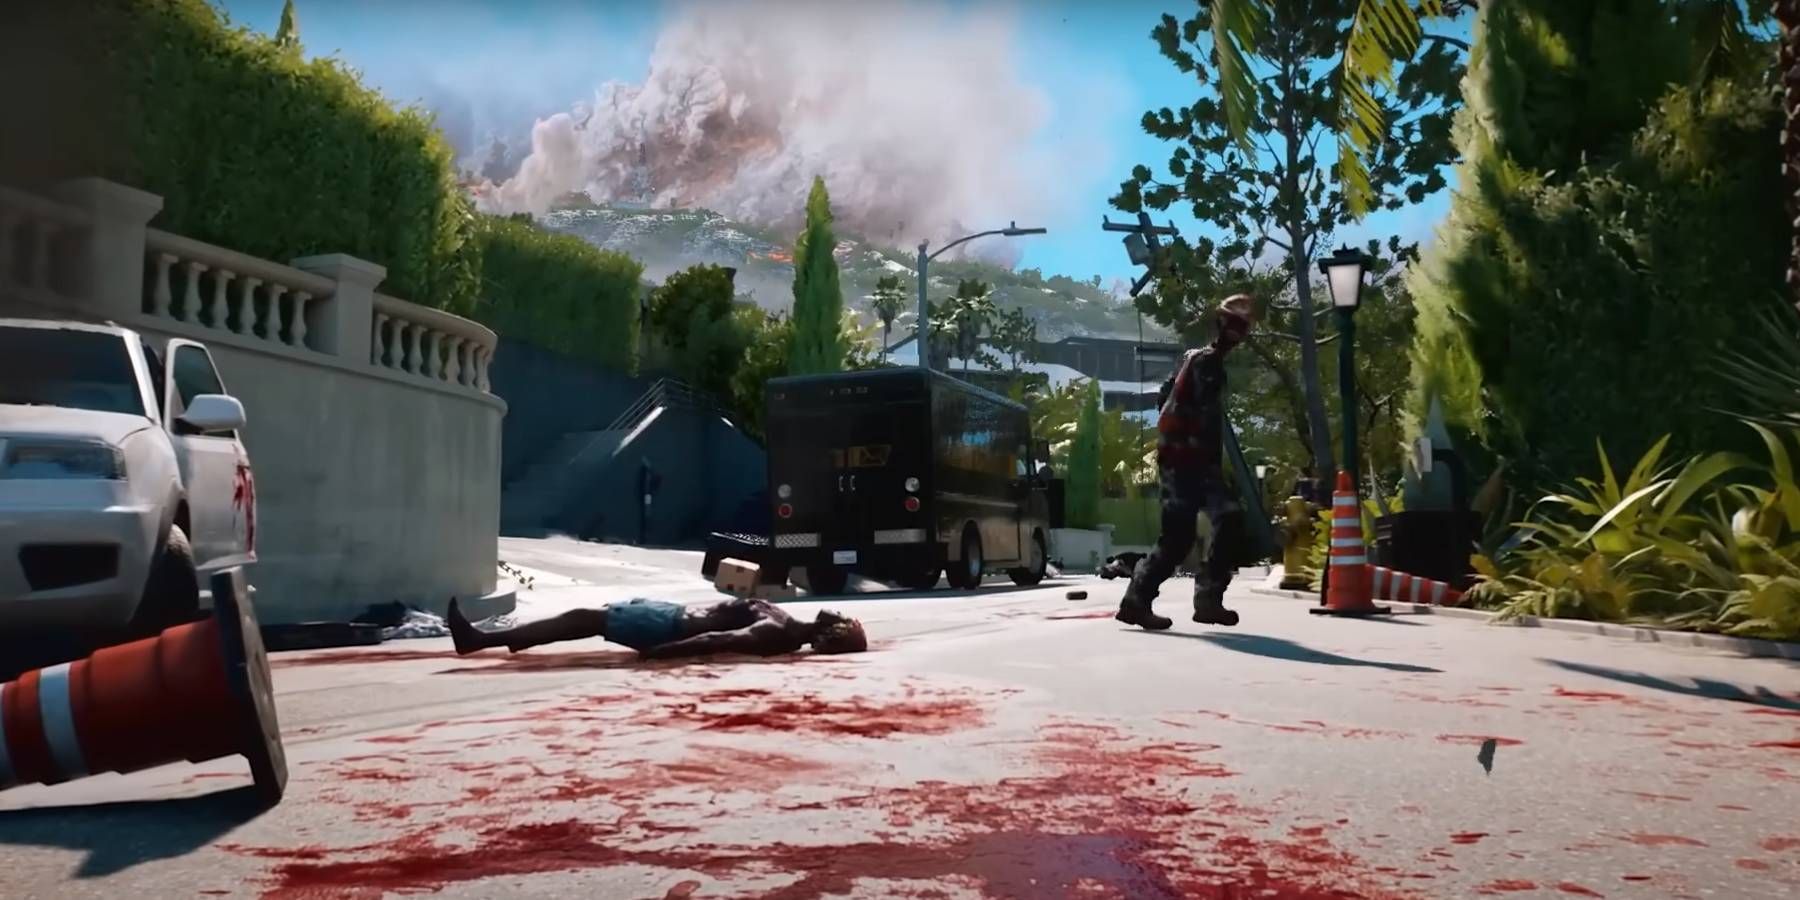 Dead Island 2 Zombie Among LA Apocalypse with Dead Body, Empty Cars, and Fire in Distance